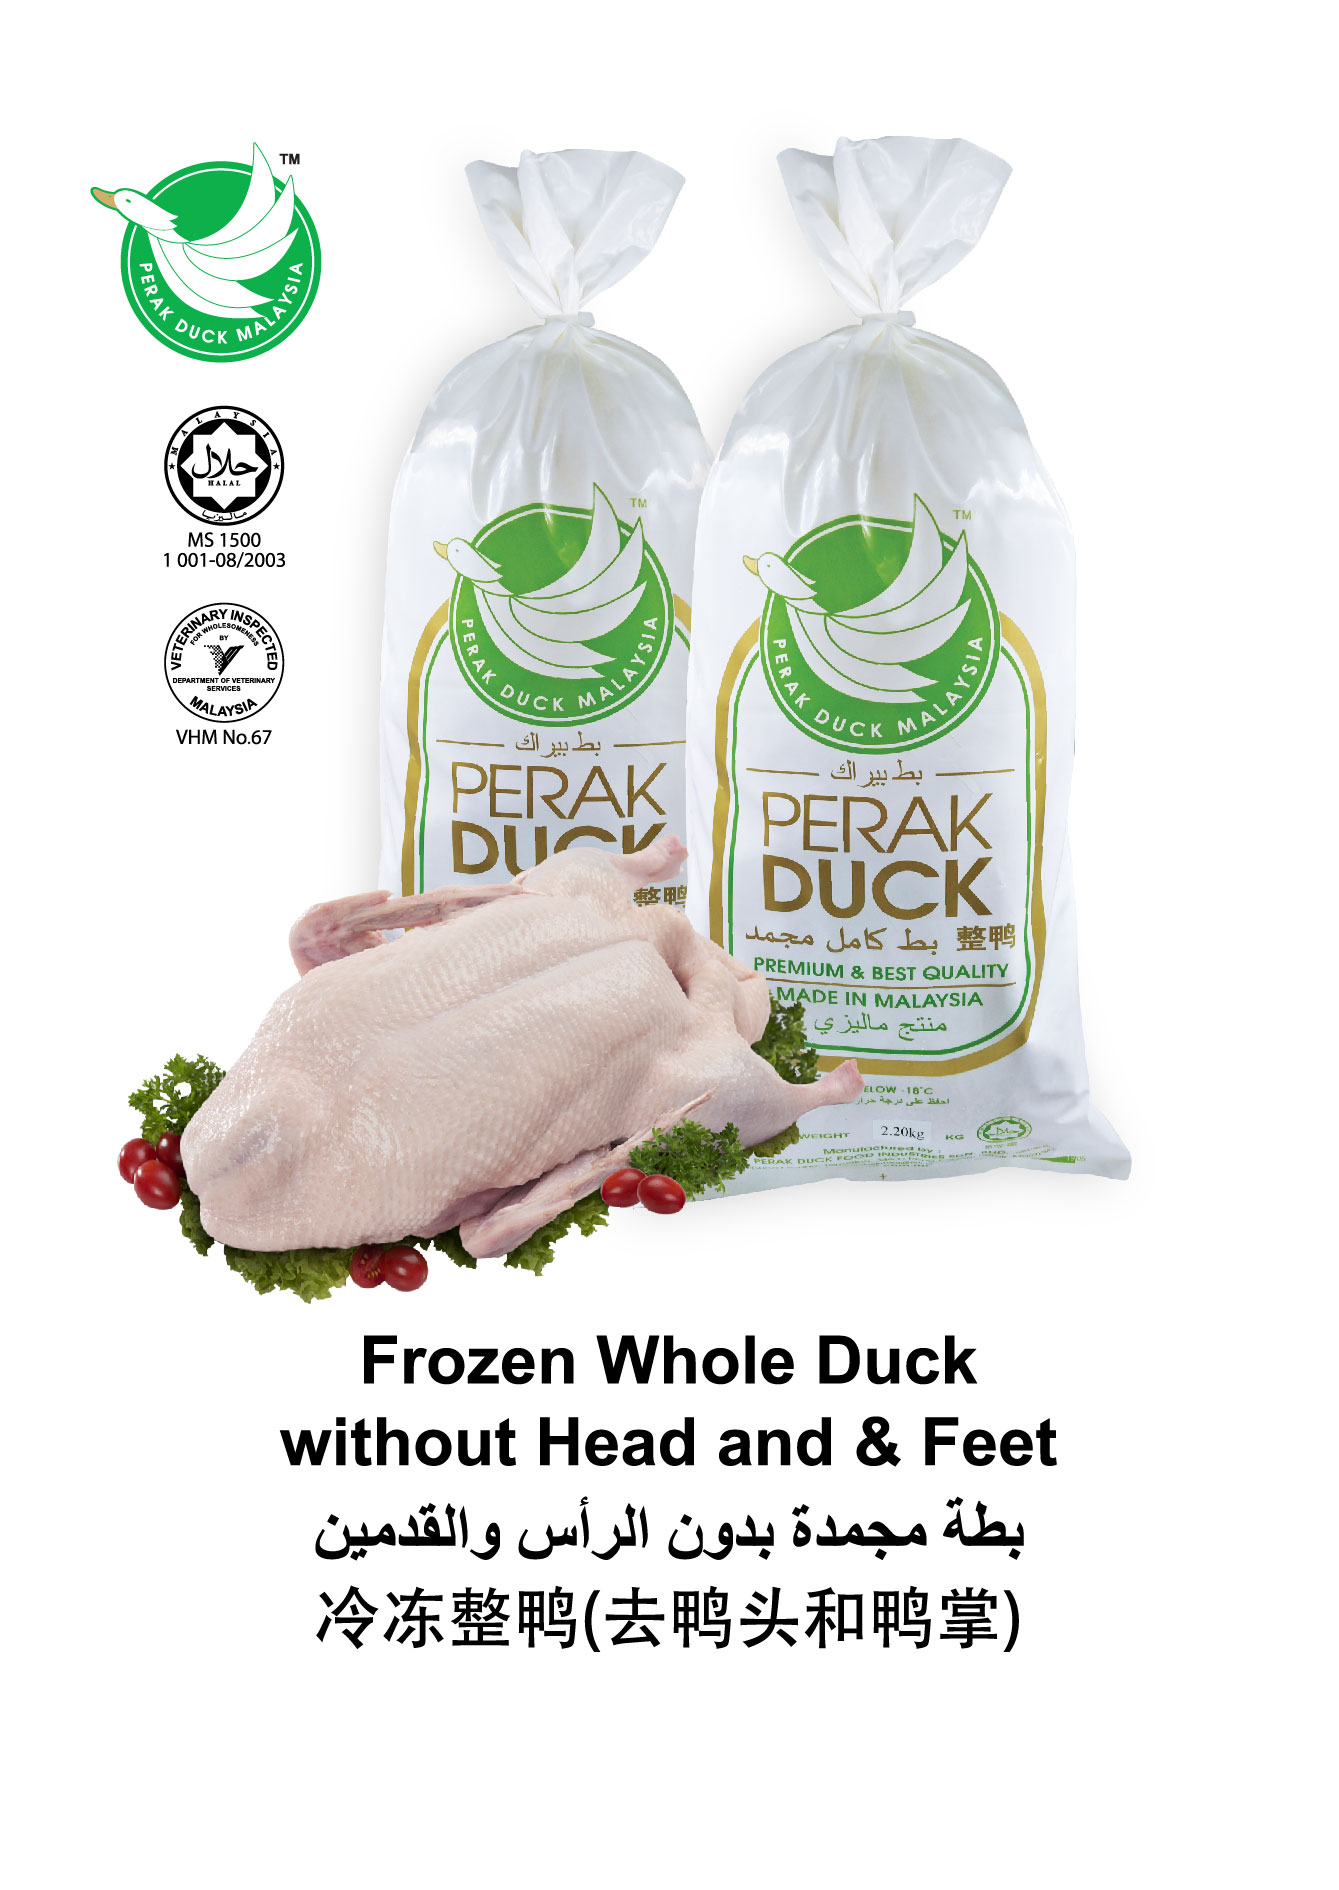 FROZEN WHOLE DUCK WITHOUT HEAD AND FEET